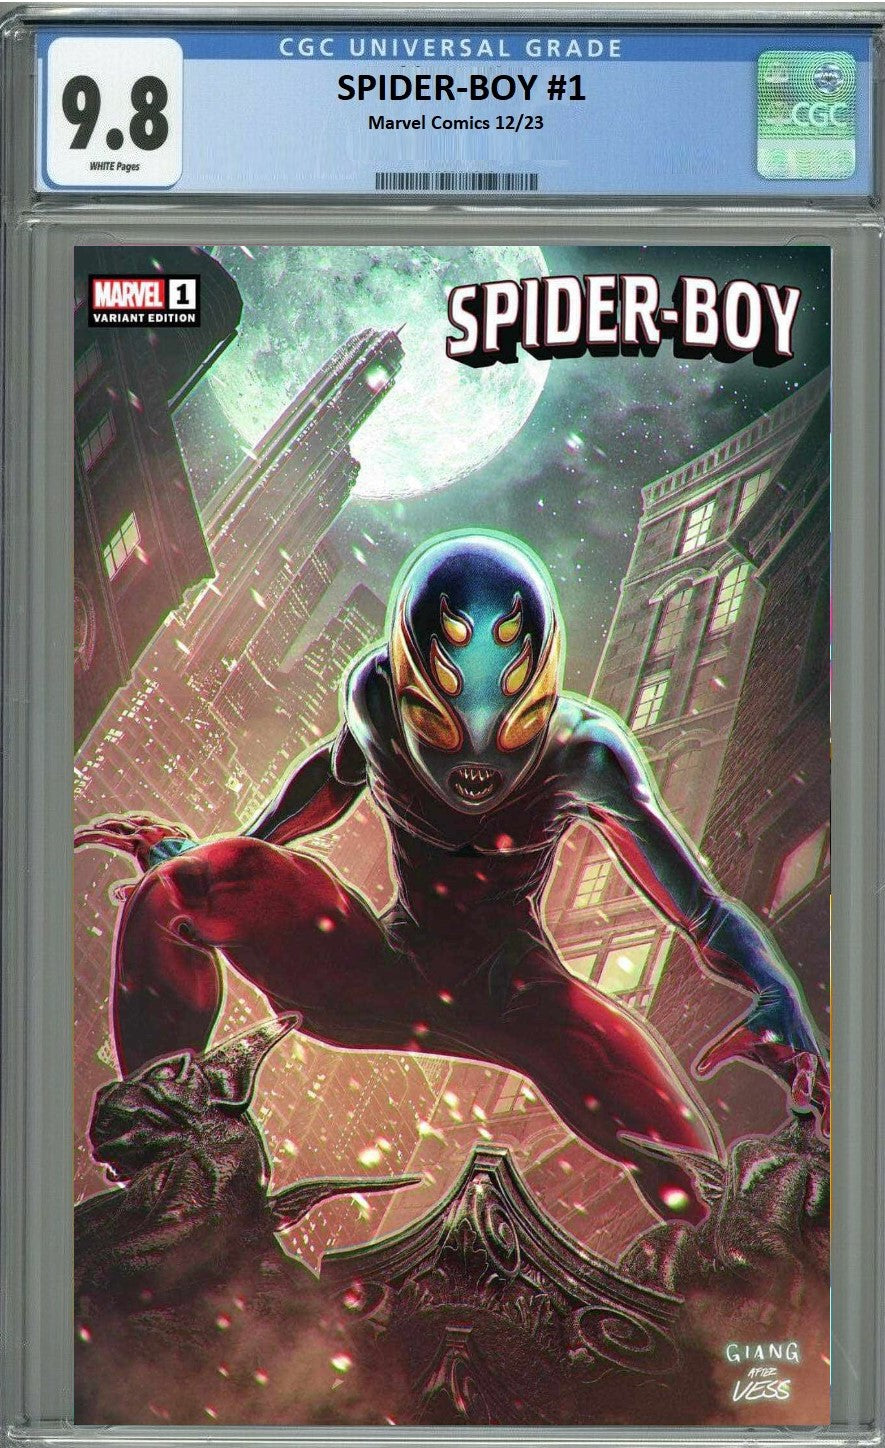 SPIDER-BOY #1 JOHN GIANG VARIANT LIMITED TO 1200 COPIES WITH NUMBERED COA CGC 9.8 PREORDER